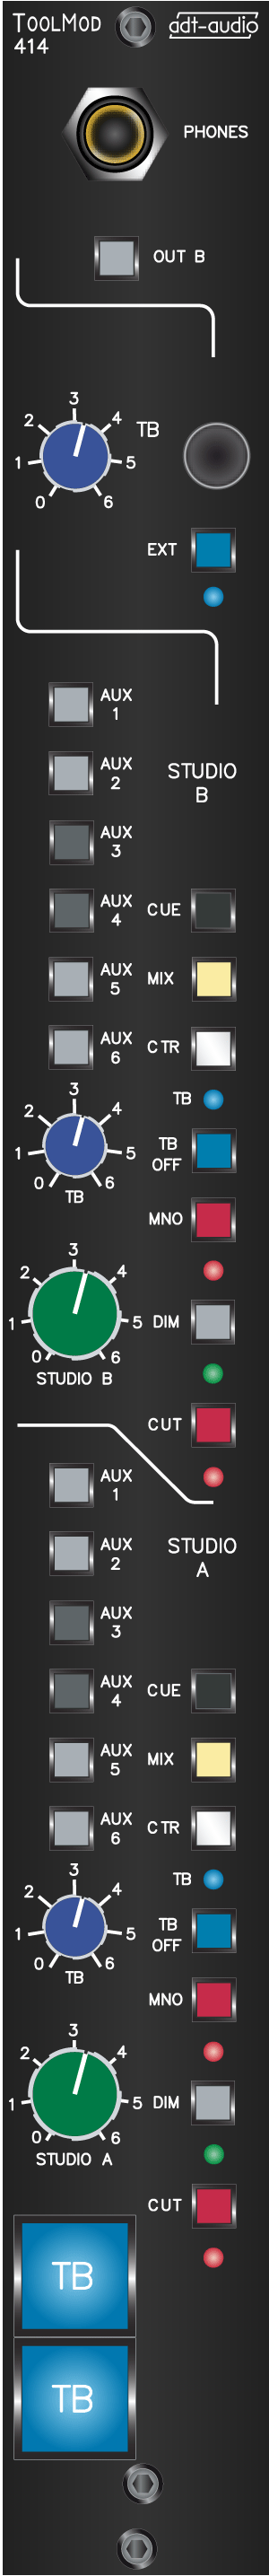 Playback and Talkback Module Face-Plate